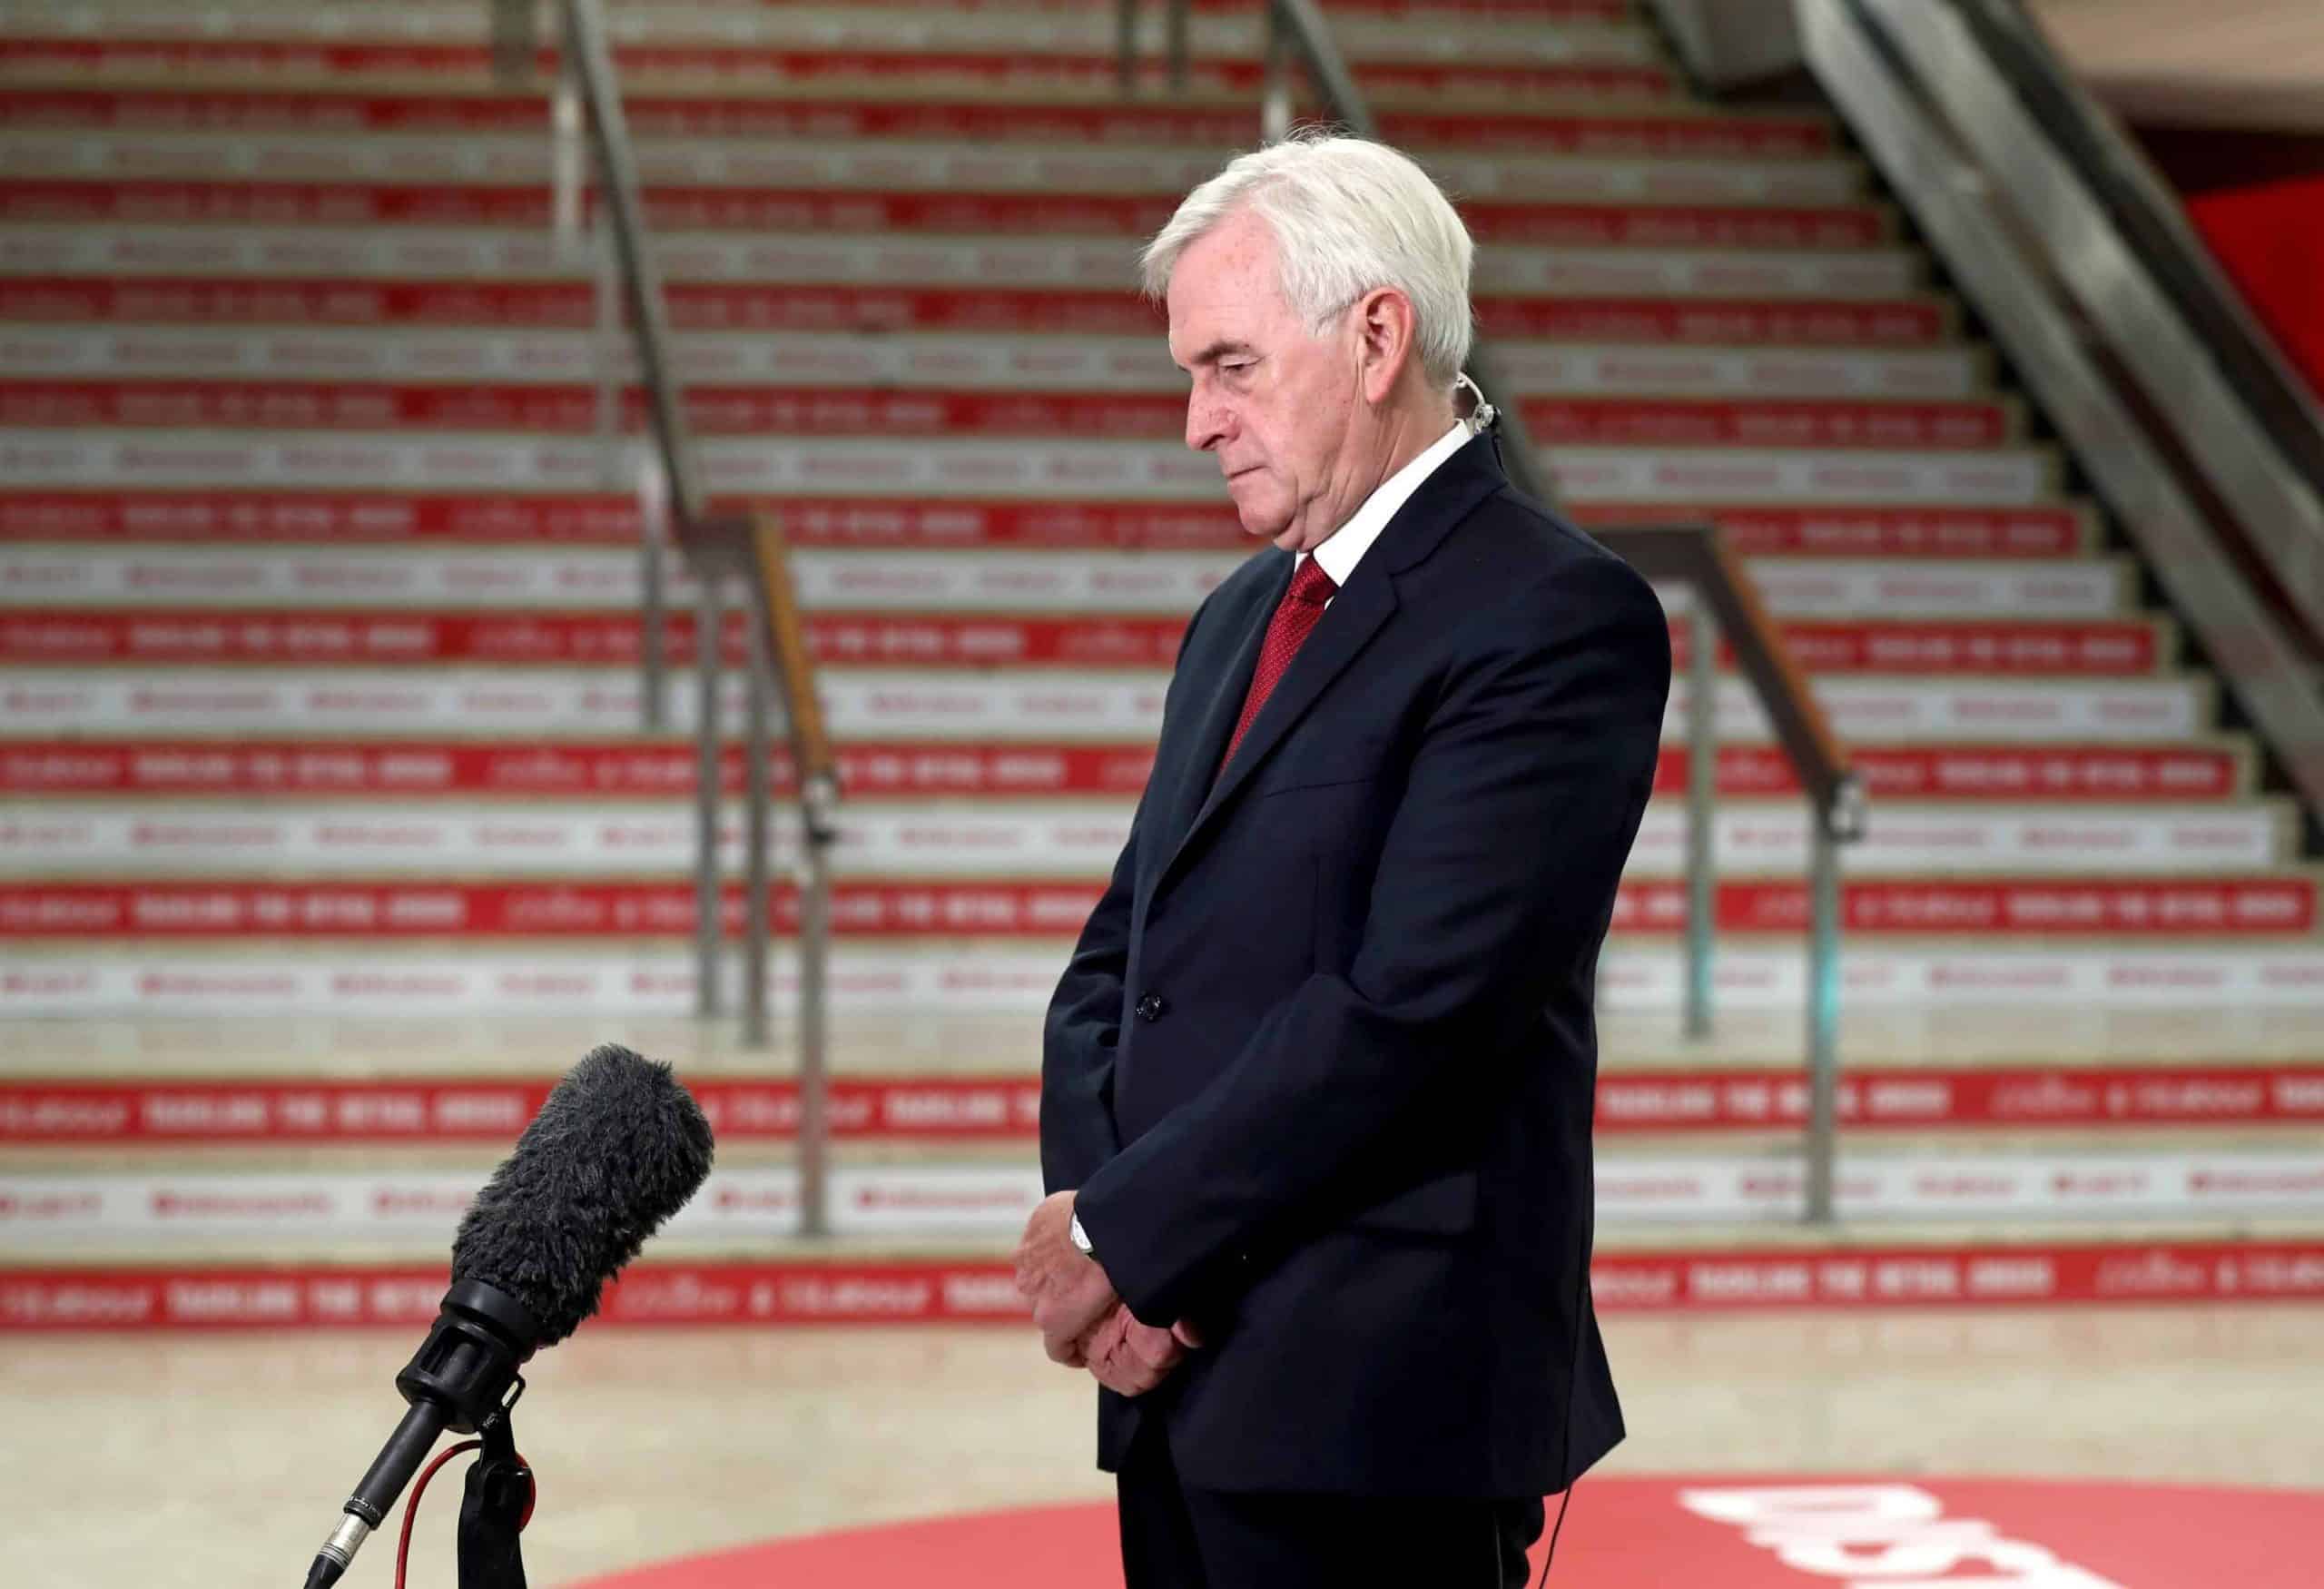 Media smear cost Labour the election, McDonnell is right to point that out